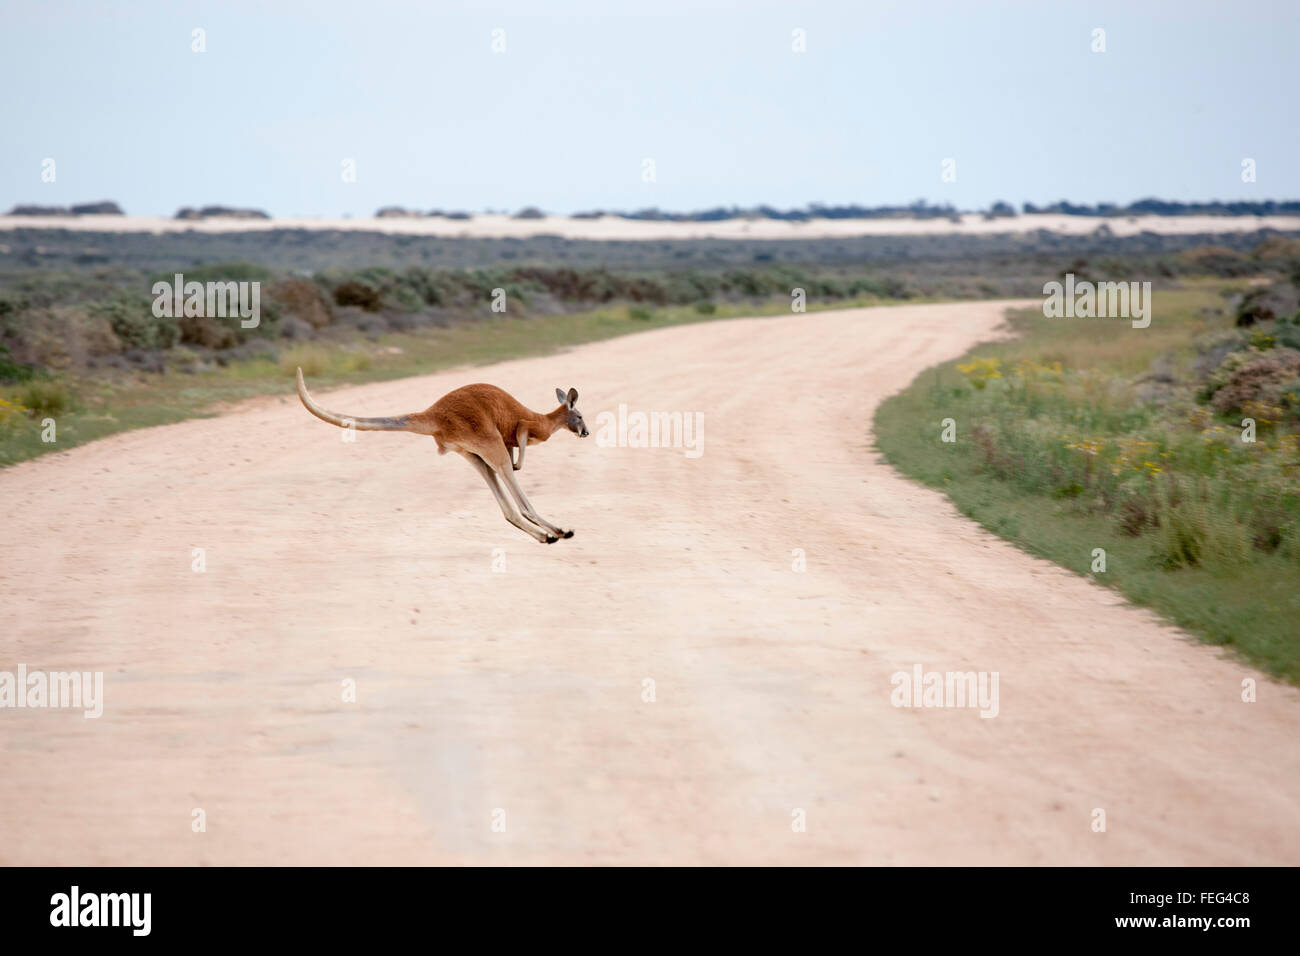 Red Kangaroo crossing the road Mungo National Park New South wales Australia Stock Photo